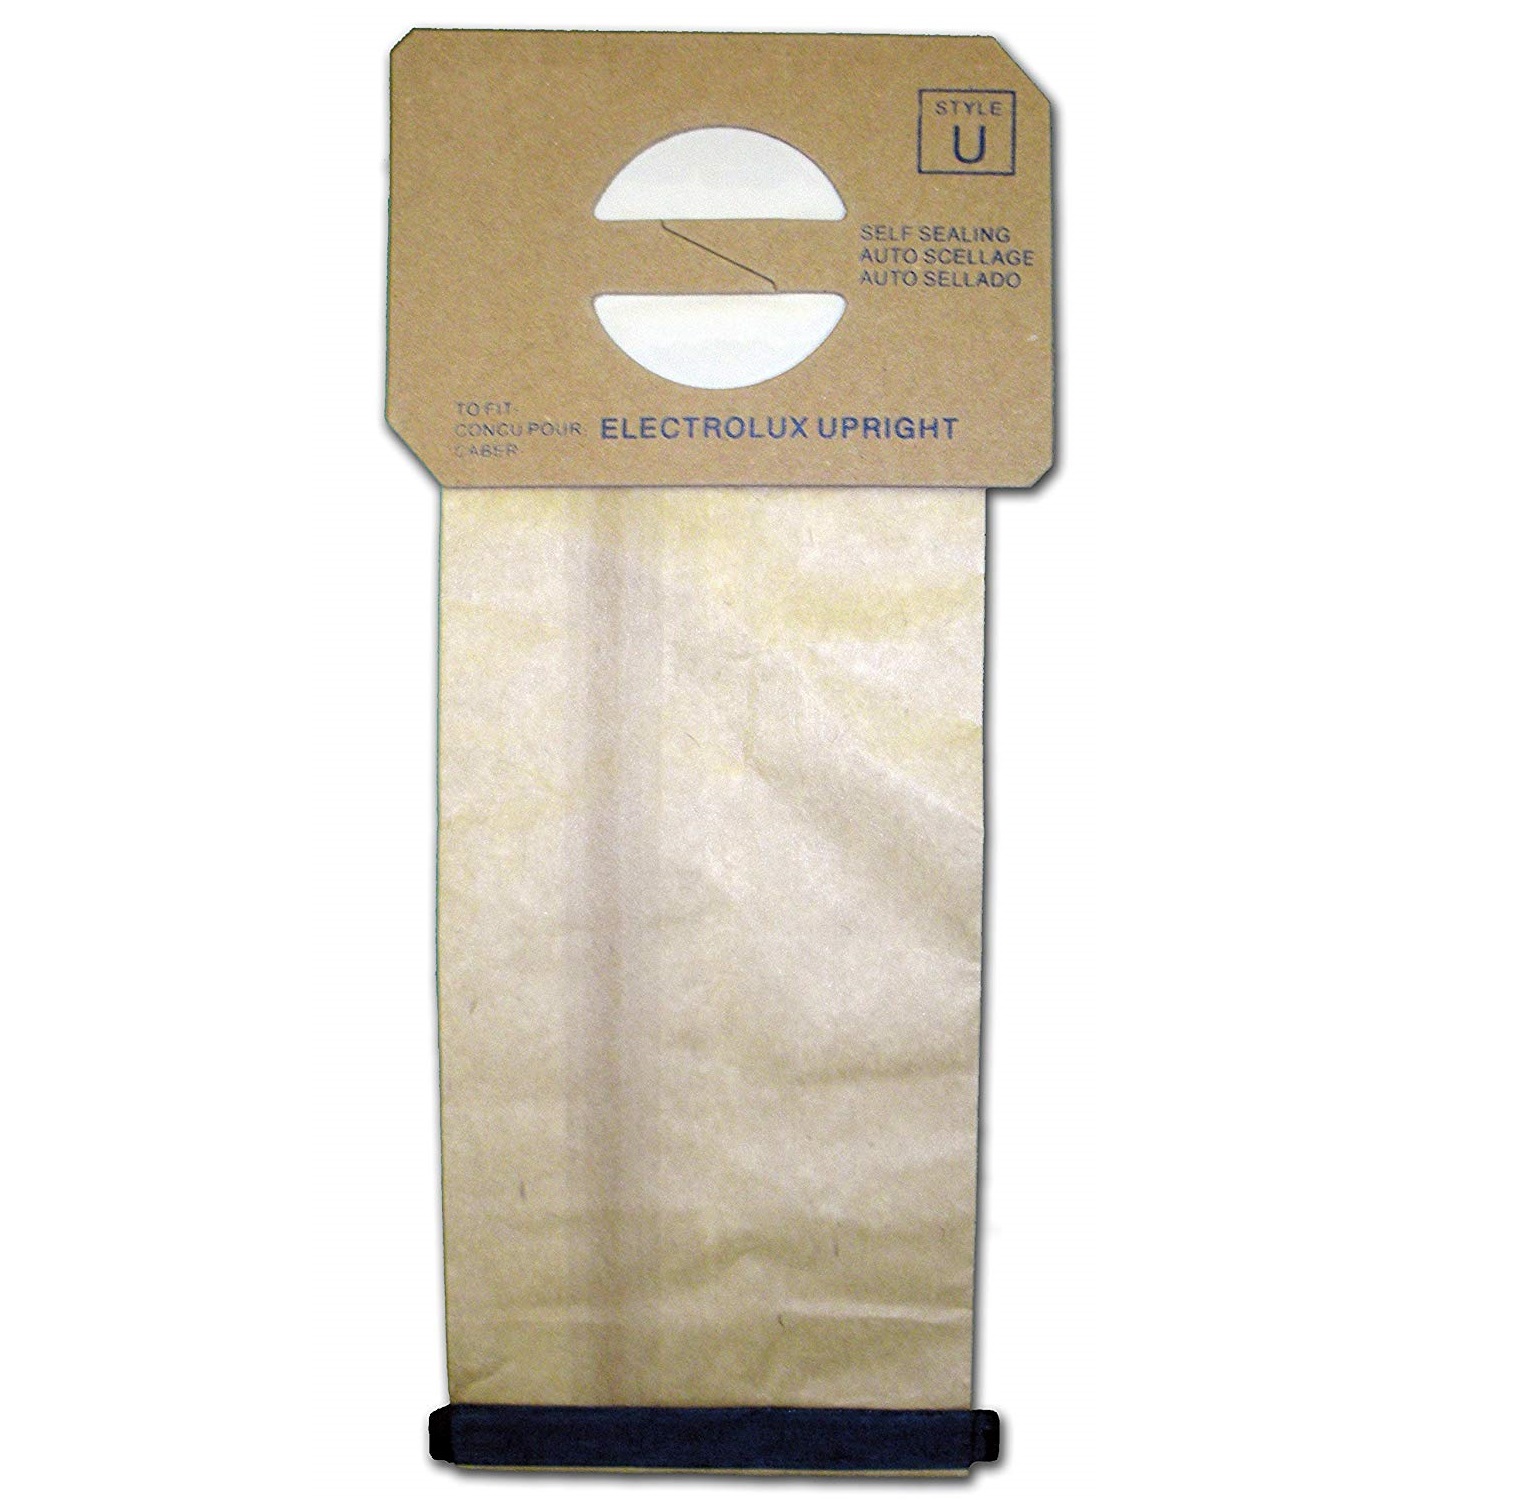 Electrolux Style U Upright Vacuum Bags (12-Pack)